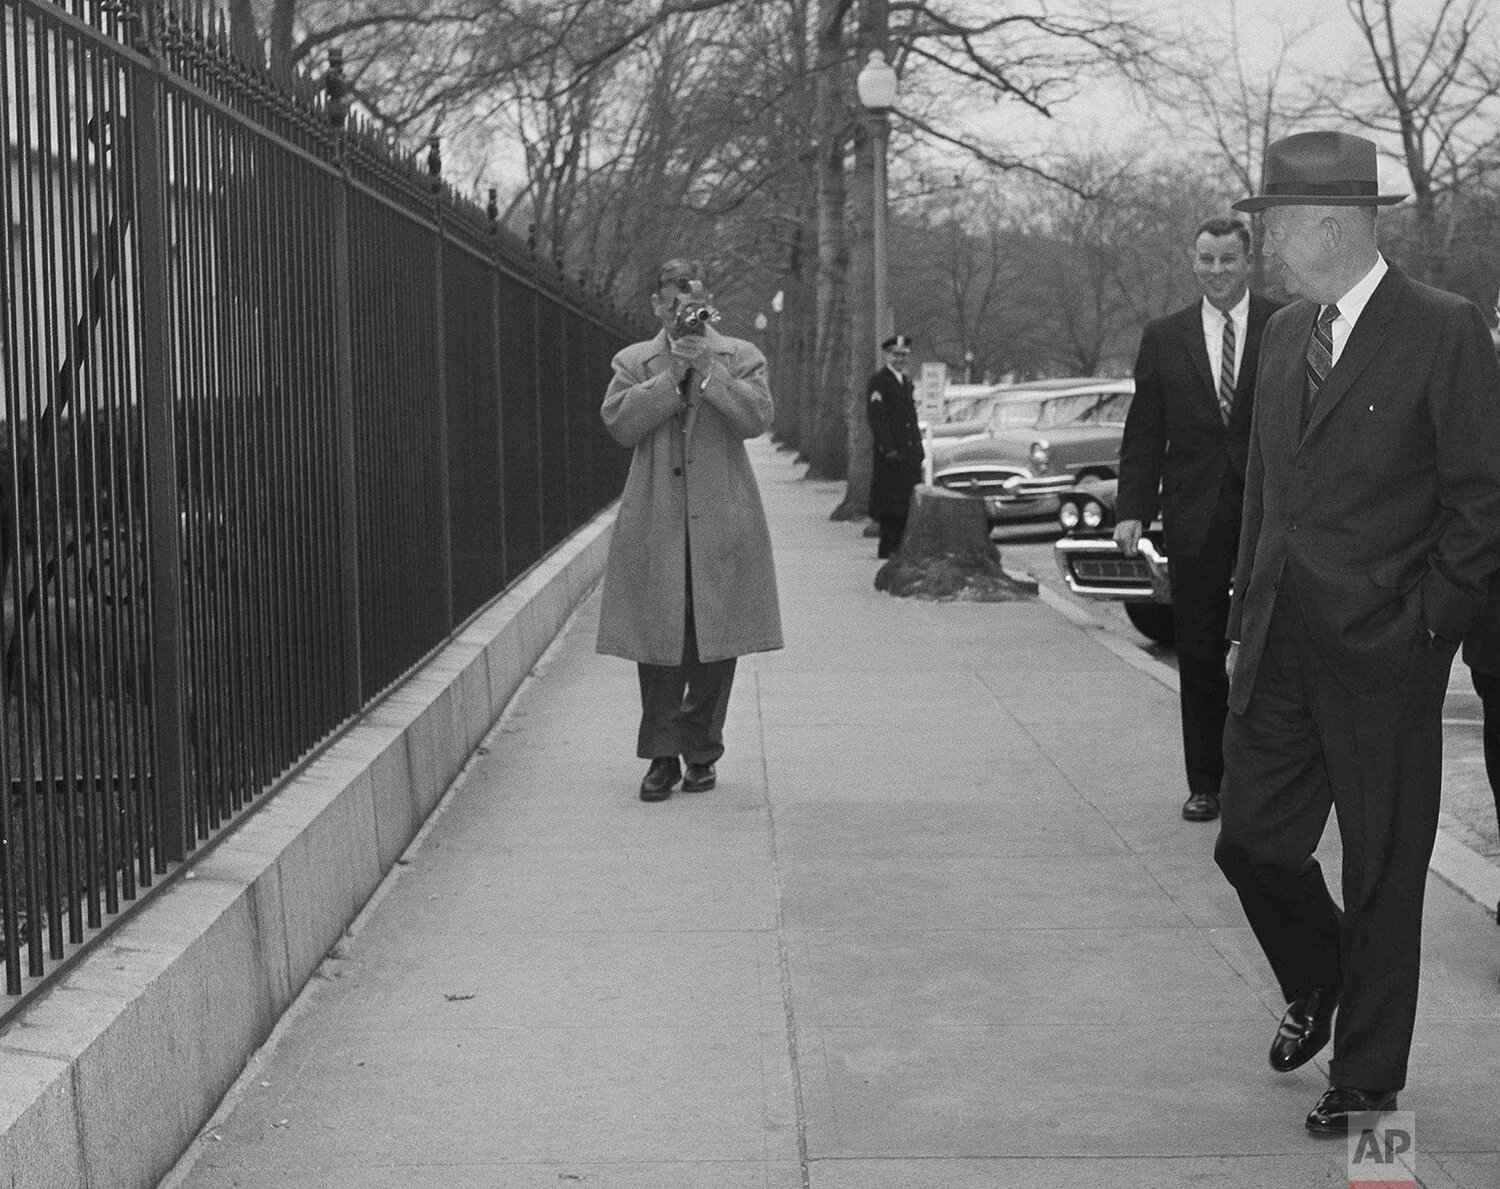  U.S. President Dwight Eisenhower has a greeting for his dog Heidi, a weimaraner, as she pokes her nose through the White House grounds fence in Washington, March 11, 1959. (AP Photo) 